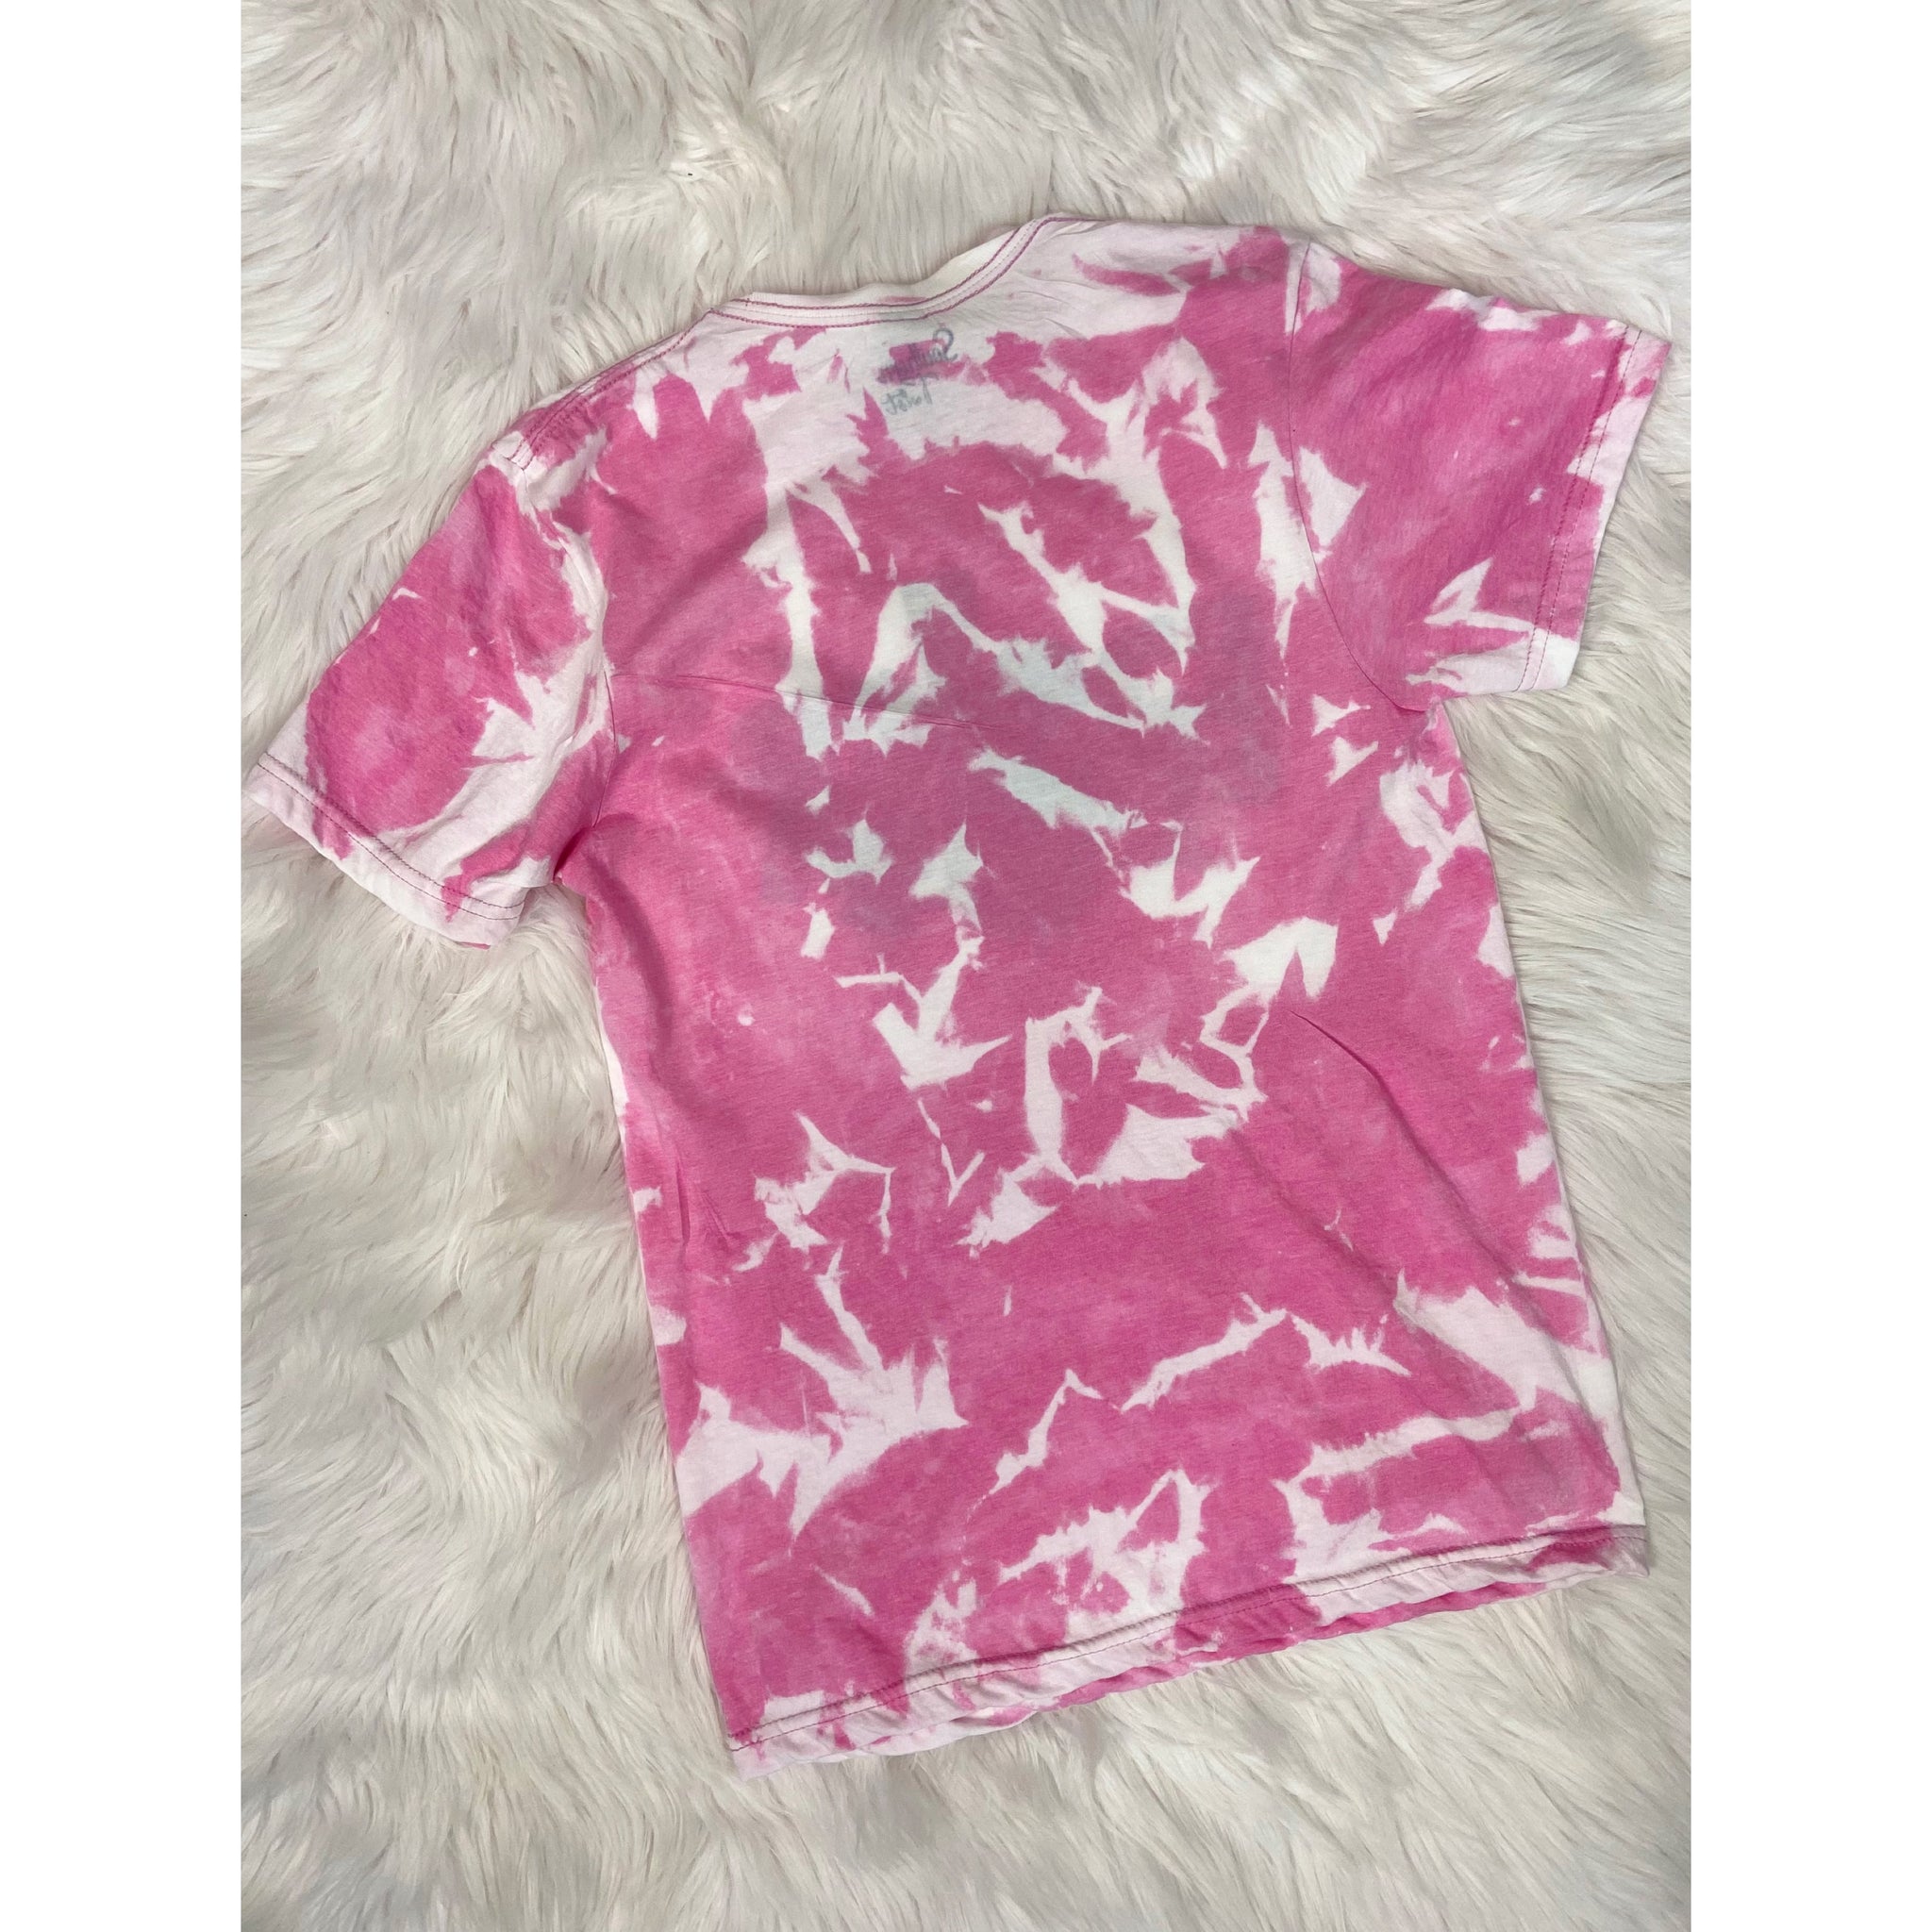 “Easter” Western Easter Bleached Sublimation Boyfriend Basic Tee Shirt Pink S/M/L/XL/2X